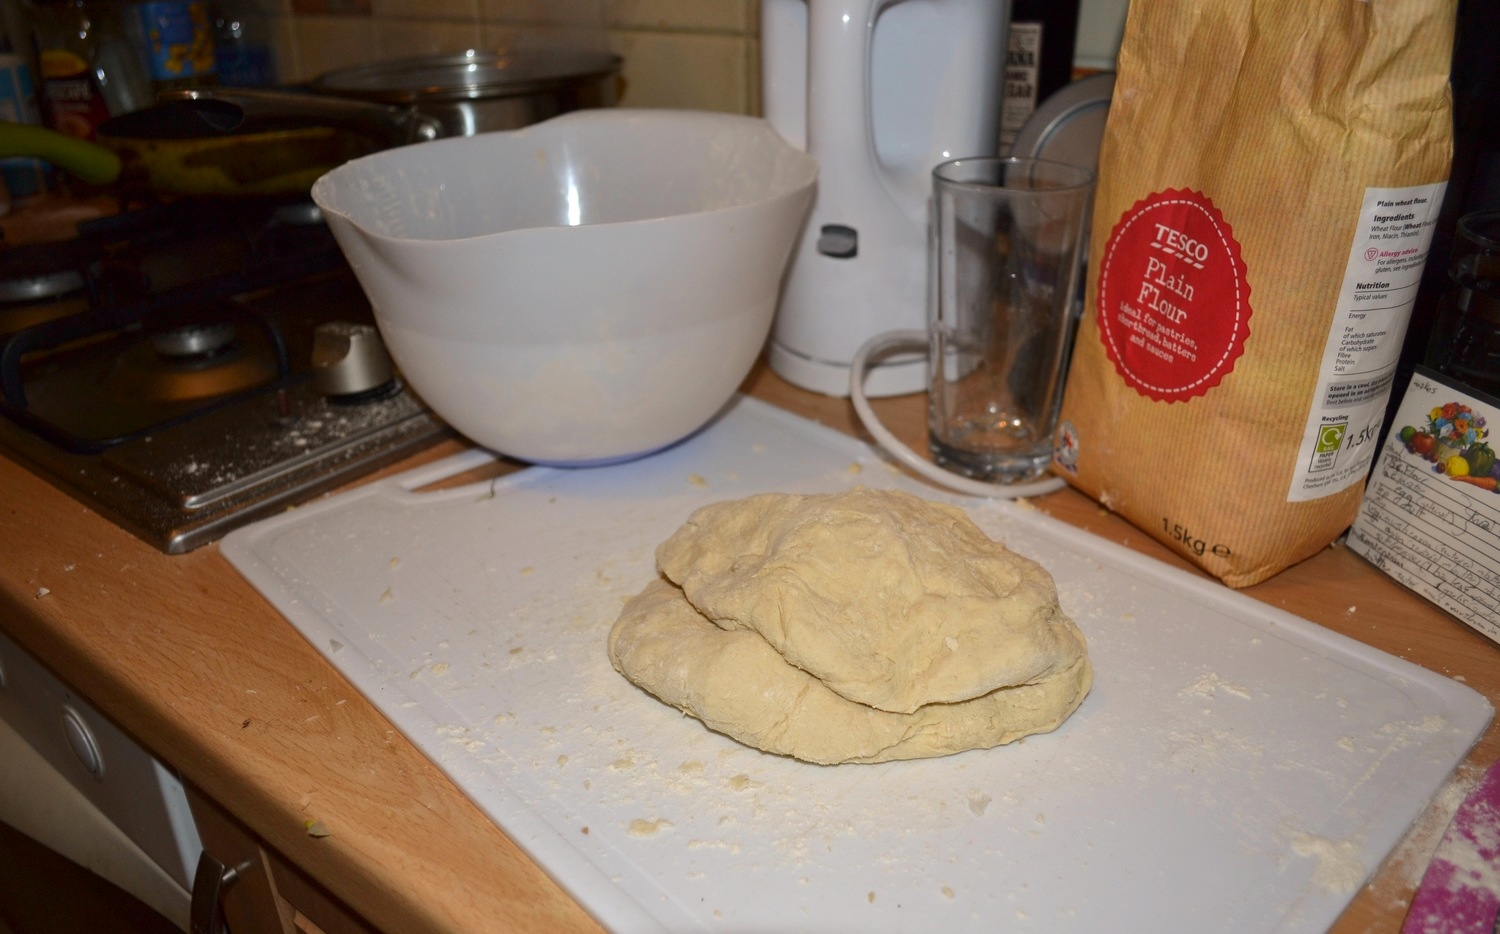 I made twice as much dough as necessary, it is a learning process!